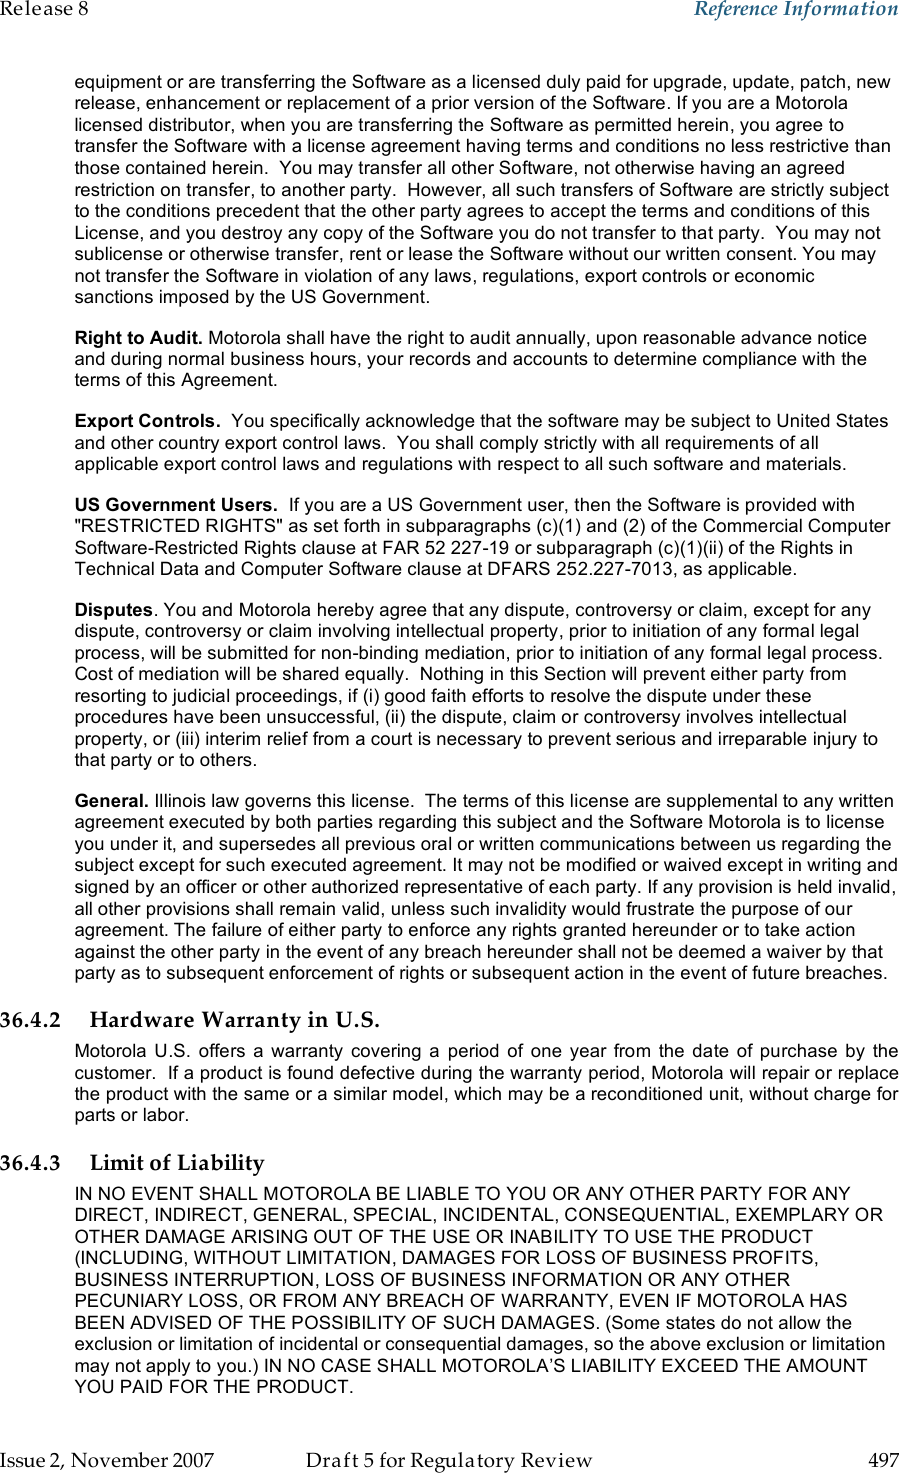 Release 8    Reference Information   Issue 2, November 2007  Draft 5 for Regulatory Review  497     equipment or are transferring the Software as a licensed duly paid for upgrade, update, patch, new release, enhancement or replacement of a prior version of the Software. If you are a Motorola licensed distributor, when you are transferring the Software as permitted herein, you agree to transfer the Software with a license agreement having terms and conditions no less restrictive than those contained herein.  You may transfer all other Software, not otherwise having an agreed restriction on transfer, to another party.  However, all such transfers of Software are strictly subject to the conditions precedent that the other party agrees to accept the terms and conditions of this License, and you destroy any copy of the Software you do not transfer to that party.  You may not sublicense or otherwise transfer, rent or lease the Software without our written consent. You may not transfer the Software in violation of any laws, regulations, export controls or economic sanctions imposed by the US Government. Right to Audit. Motorola shall have the right to audit annually, upon reasonable advance notice and during normal business hours, your records and accounts to determine compliance with the terms of this Agreement.  Export Controls.  You specifically acknowledge that the software may be subject to United States and other country export control laws.  You shall comply strictly with all requirements of all applicable export control laws and regulations with respect to all such software and materials. US Government Users.  If you are a US Government user, then the Software is provided with &quot;RESTRICTED RIGHTS&quot; as set forth in subparagraphs (c)(1) and (2) of the Commercial Computer Software-Restricted Rights clause at FAR 52 227-19 or subparagraph (c)(1)(ii) of the Rights in Technical Data and Computer Software clause at DFARS 252.227-7013, as applicable. Disputes. You and Motorola hereby agree that any dispute, controversy or claim, except for any dispute, controversy or claim involving intellectual property, prior to initiation of any formal legal process, will be submitted for non-binding mediation, prior to initiation of any formal legal process.  Cost of mediation will be shared equally.  Nothing in this Section will prevent either party from resorting to judicial proceedings, if (i) good faith efforts to resolve the dispute under these procedures have been unsuccessful, (ii) the dispute, claim or controversy involves intellectual property, or (iii) interim relief from a court is necessary to prevent serious and irreparable injury to that party or to others. General. Illinois law governs this license.  The terms of this license are supplemental to any written agreement executed by both parties regarding this subject and the Software Motorola is to license you under it, and supersedes all previous oral or written communications between us regarding the subject except for such executed agreement. It may not be modified or waived except in writing and signed by an officer or other authorized representative of each party. If any provision is held invalid, all other provisions shall remain valid, unless such invalidity would frustrate the purpose of our agreement. The failure of either party to enforce any rights granted hereunder or to take action against the other party in the event of any breach hereunder shall not be deemed a waiver by that party as to subsequent enforcement of rights or subsequent action in the event of future breaches. 36.4.2 Hardware Warranty in U.S. Motorola U.S.  offers  a  warranty  covering  a  period  of  one  year from the  date  of  purchase  by  the customer.  If a product is found defective during the warranty period, Motorola will repair or replace the product with the same or a similar model, which may be a reconditioned unit, without charge for parts or labor.  36.4.3 Limit of Liability IN NO EVENT SHALL MOTOROLA BE LIABLE TO YOU OR ANY OTHER PARTY FOR ANY DIRECT, INDIRECT, GENERAL, SPECIAL, INCIDENTAL, CONSEQUENTIAL, EXEMPLARY OR OTHER DAMAGE ARISING OUT OF THE USE OR INABILITY TO USE THE PRODUCT (INCLUDING, WITHOUT LIMITATION, DAMAGES FOR LOSS OF BUSINESS PROFITS, BUSINESS INTERRUPTION, LOSS OF BUSINESS INFORMATION OR ANY OTHER PECUNIARY LOSS, OR FROM ANY BREACH OF WARRANTY, EVEN IF MOTOROLA HAS BEEN ADVISED OF THE POSSIBILITY OF SUCH DAMAGES. (Some states do not allow the exclusion or limitation of incidental or consequential damages, so the above exclusion or limitation may not apply to you.) IN NO CASE SHALL MOTOROLA’S LIABILITY EXCEED THE AMOUNT YOU PAID FOR THE PRODUCT. 